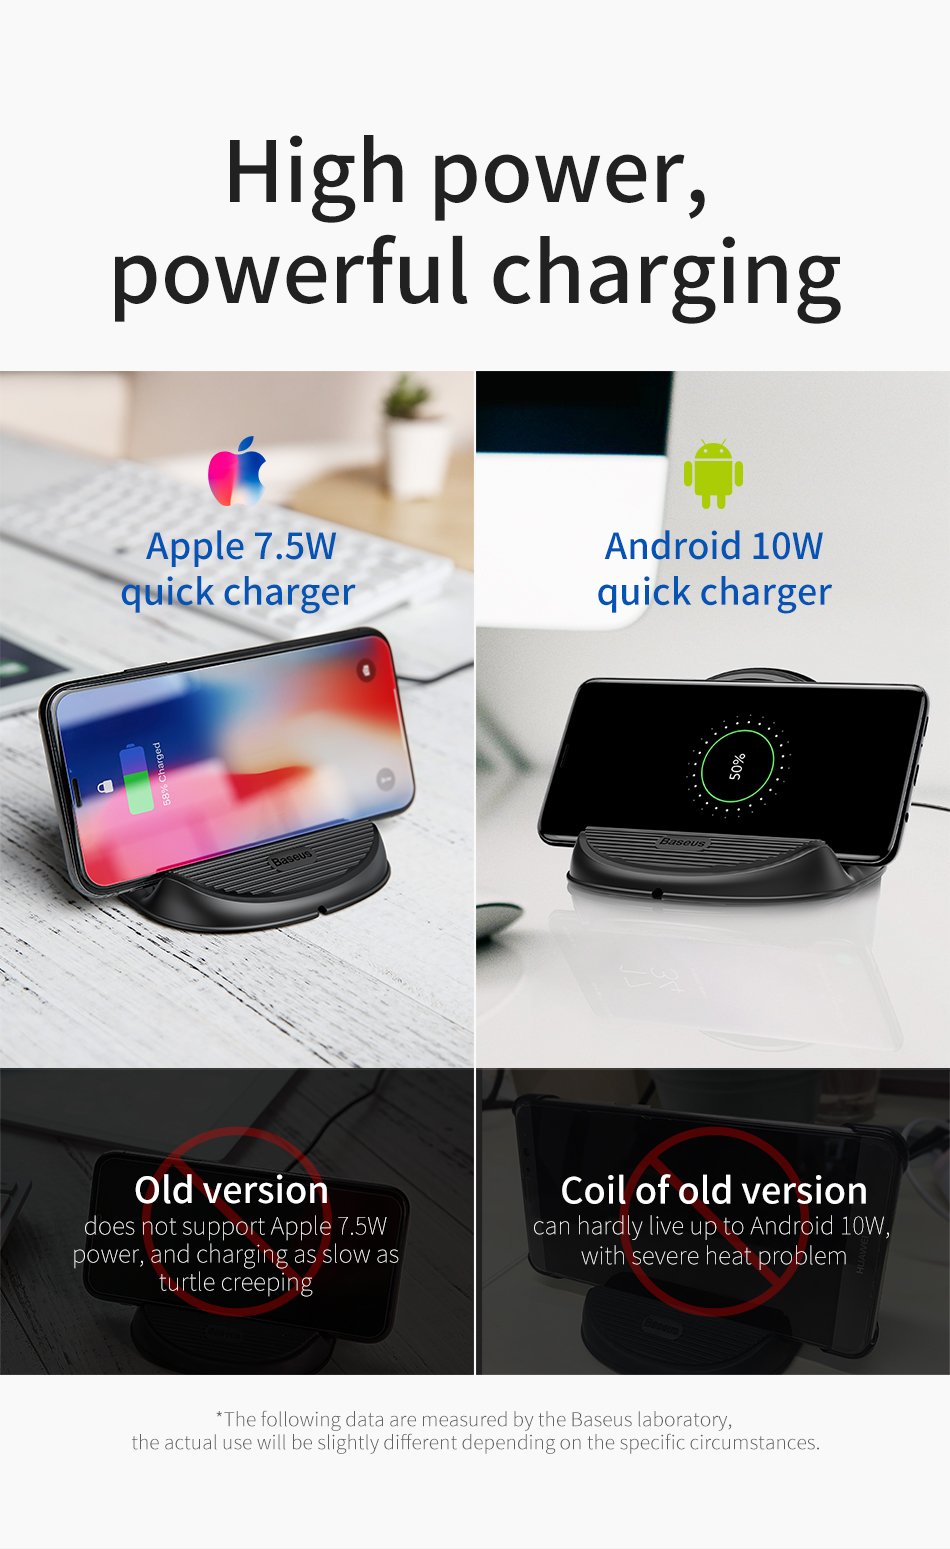 Baseus Desktop QI Wireless Charger 10W Radiating Fan Wireless Fast charging charger for iPhone X 8 Samsung S9 OnePlus 6 Xiaomi 4